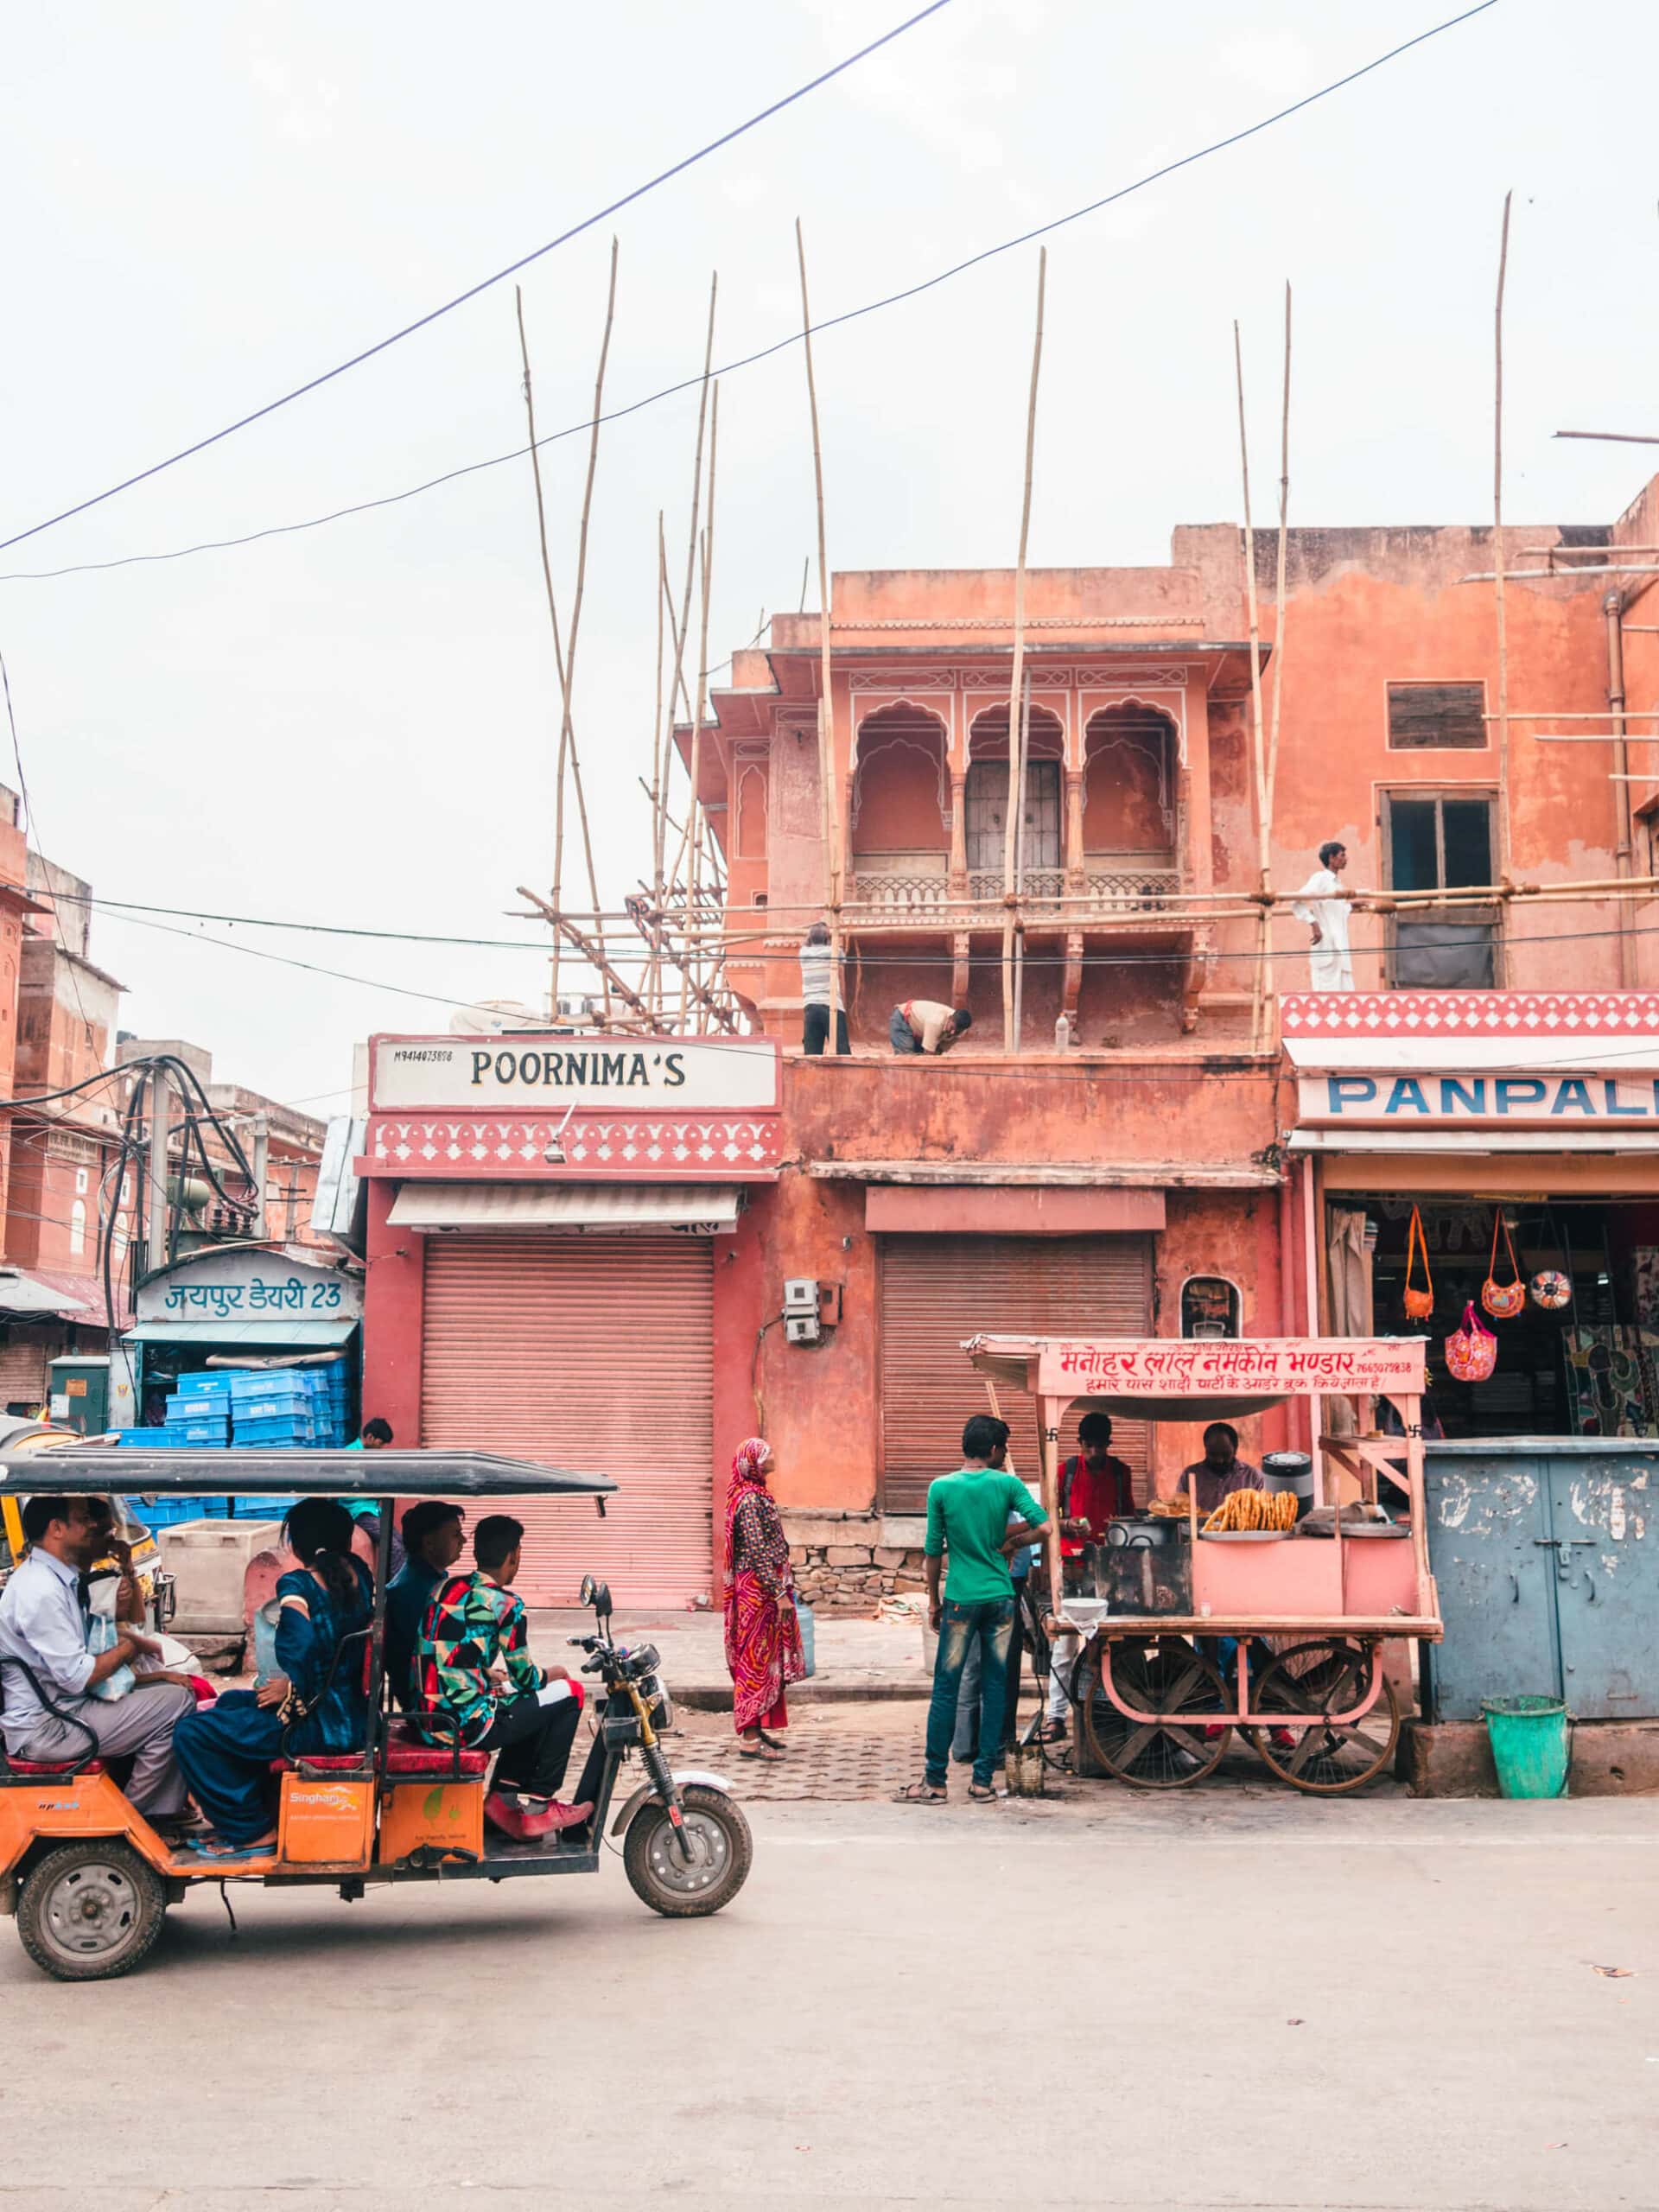 The busy streets of Jaipur, India's Pink City.